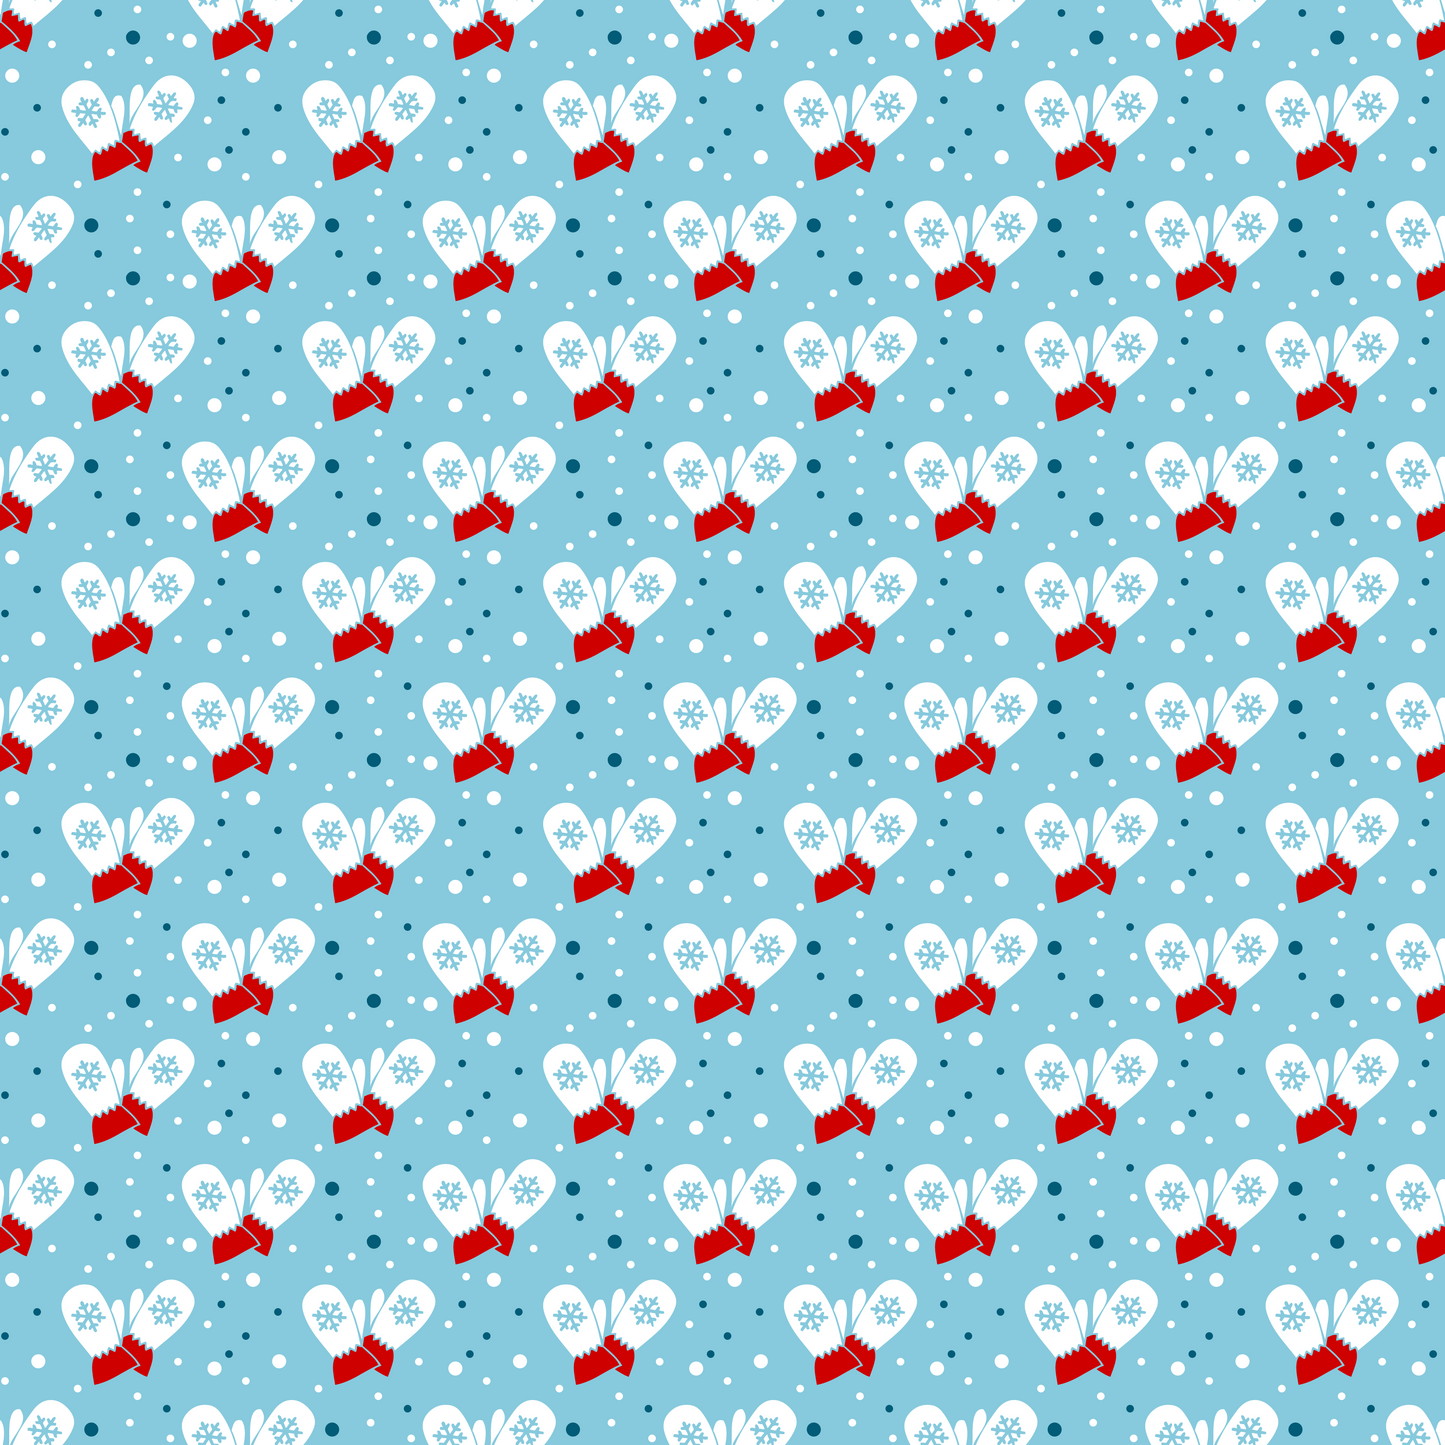 Winter Fun - Red and White Mittens on Blue Background 015